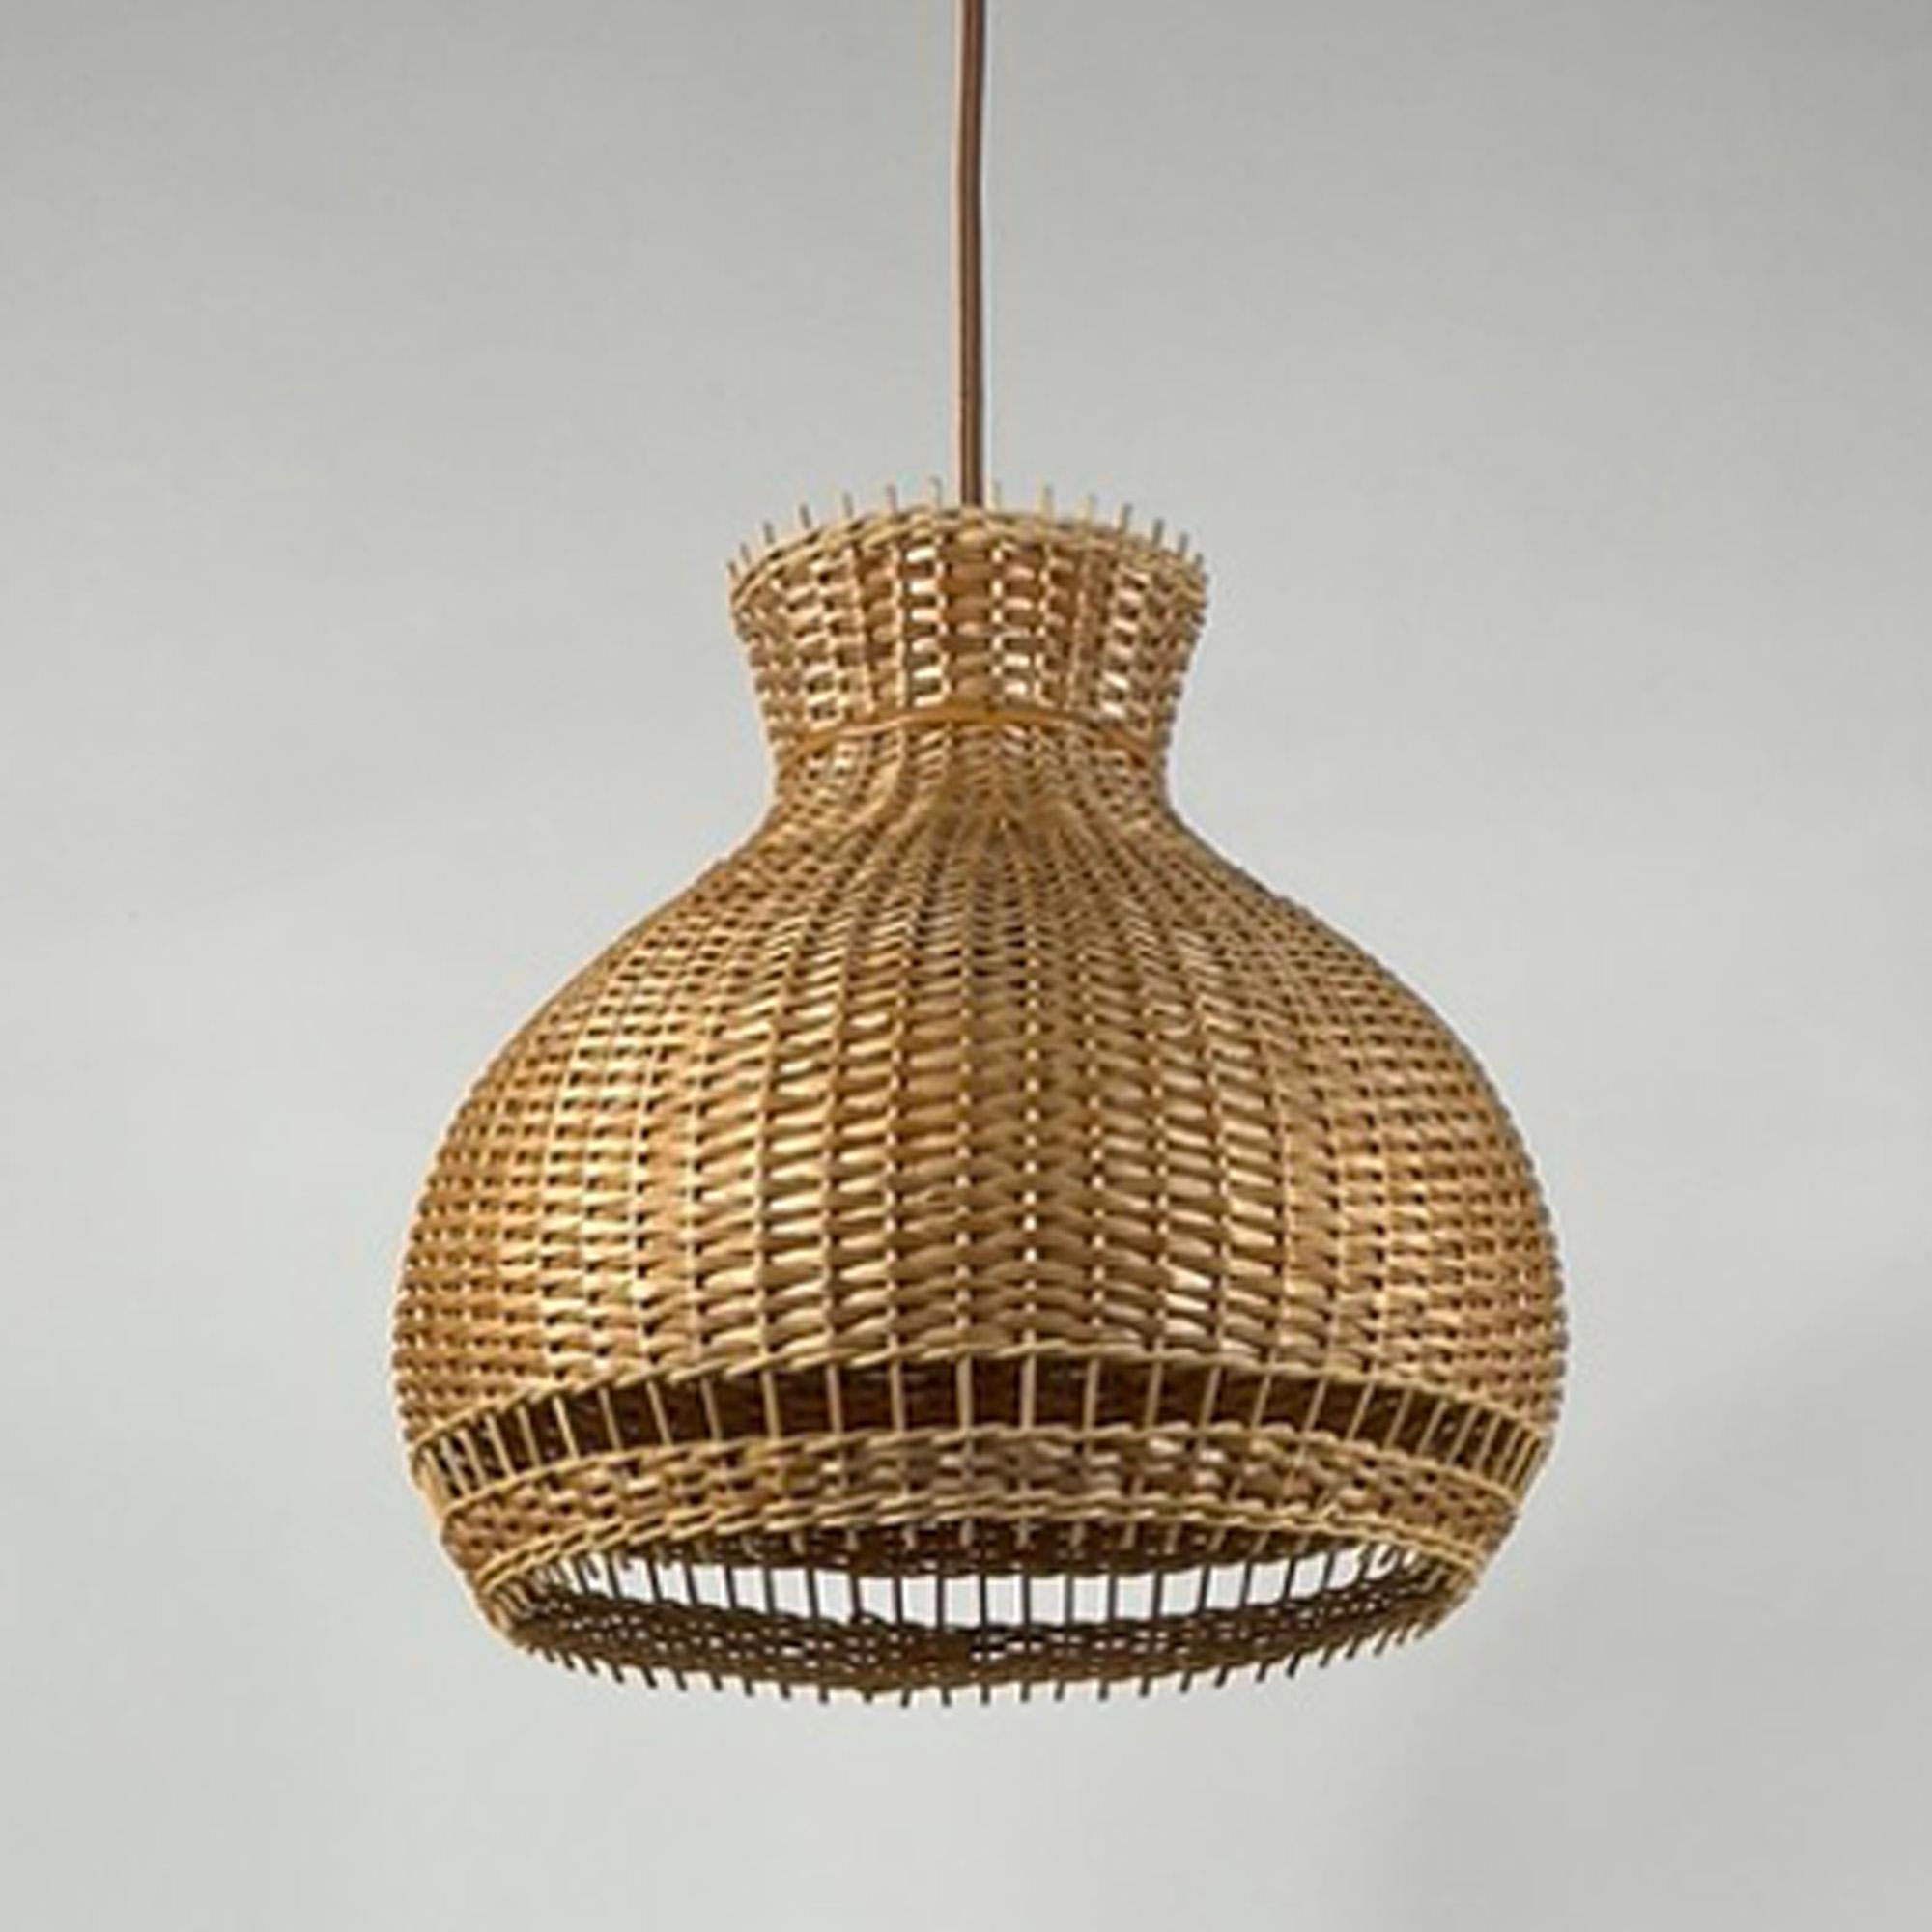 This beautiful handcrafted pendant was designed and manufactured in Austria in the 1950s to 1960s. It features a large rattan lampshade with light brown silk cord and brass canopy. The canopy is new and any other canopy can be chosen.

The light has